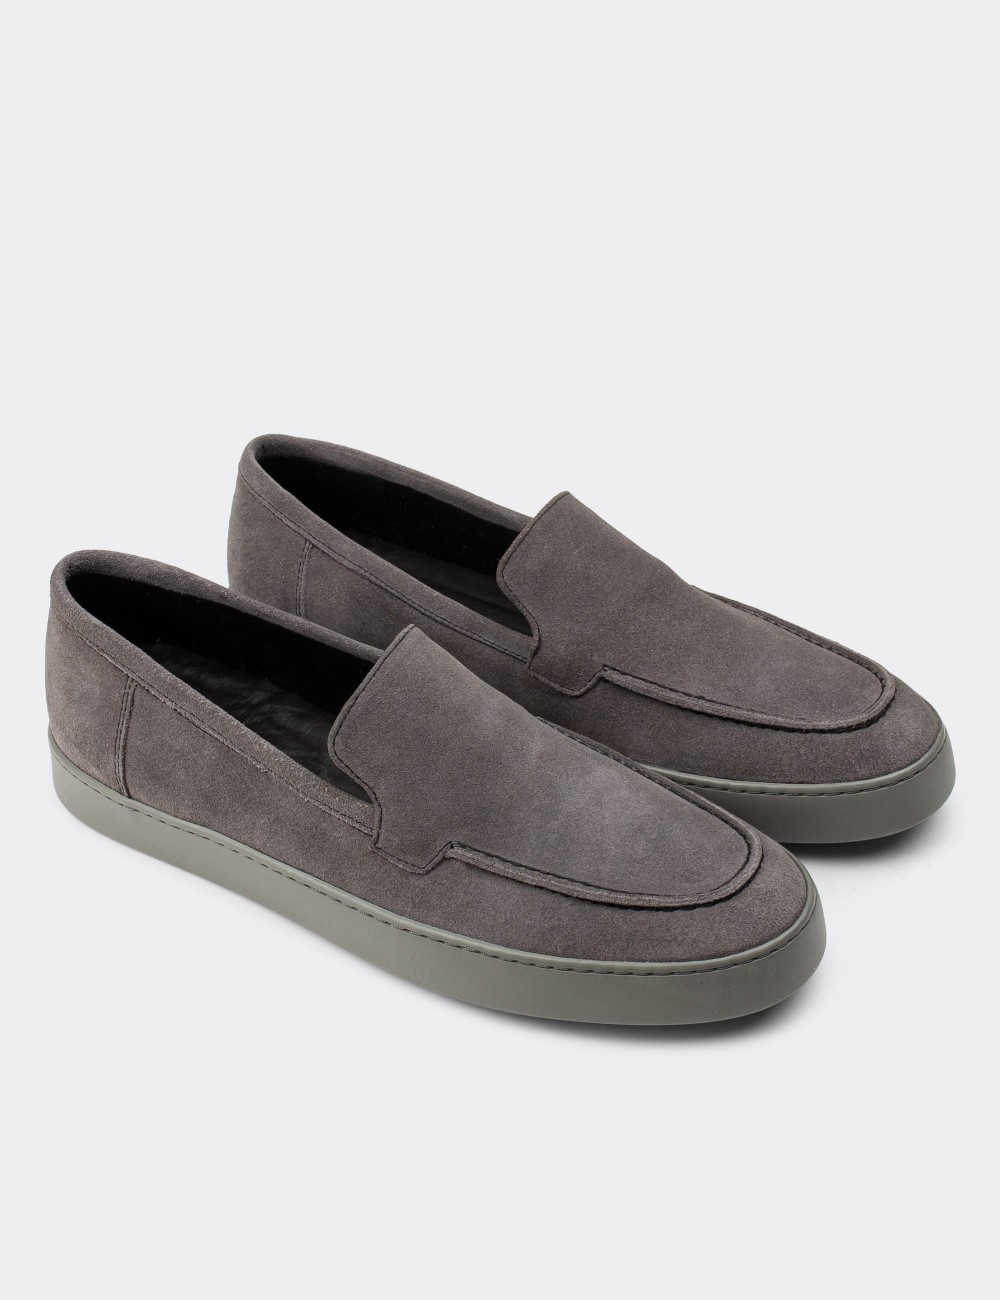 Gray Suede Leather Loafers - 01865MGRIC01